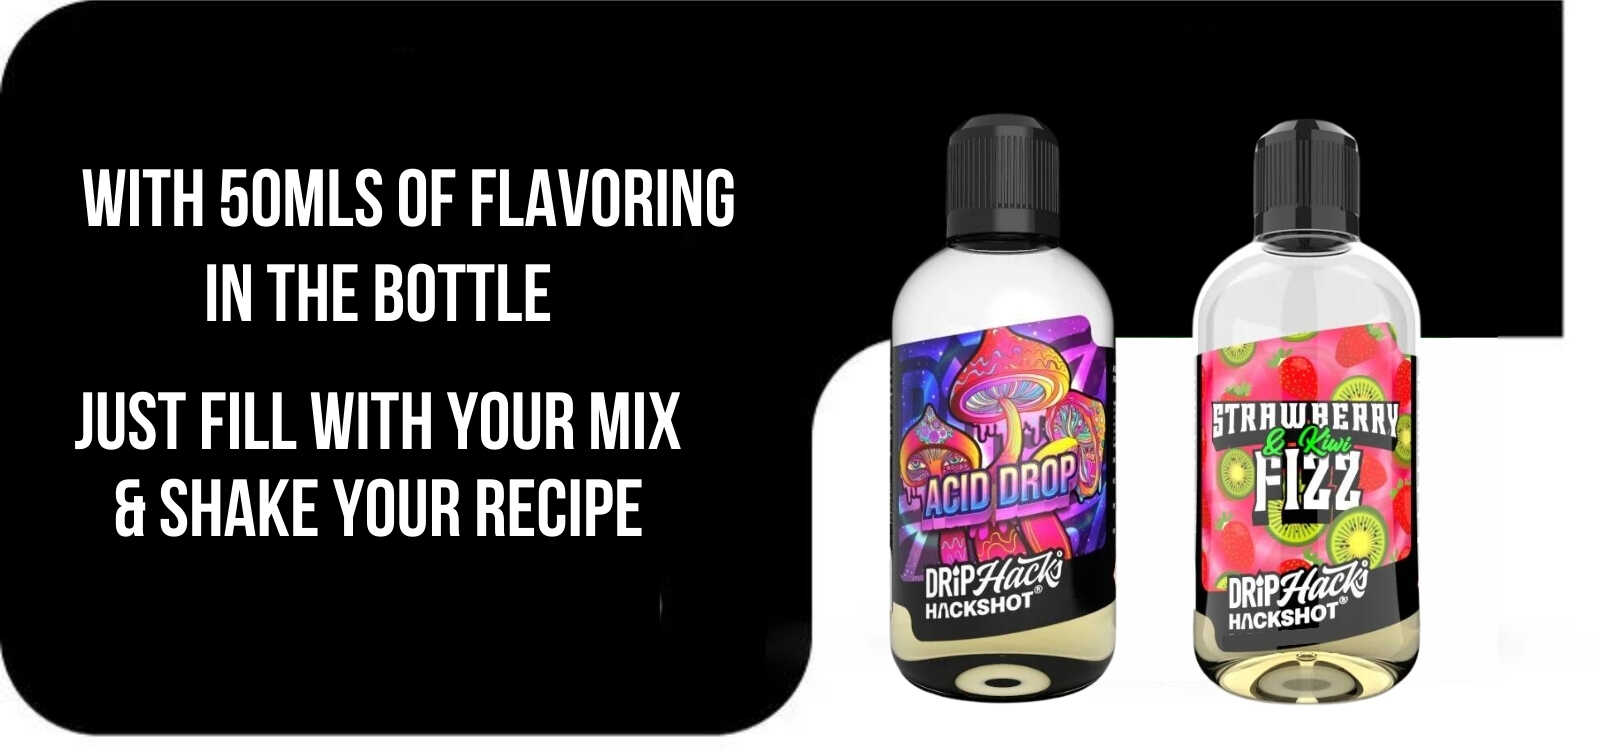 eliquid flavours in Canada or One Shots in a 250ml size bottle. These ejuice flavours are high quality flavours.